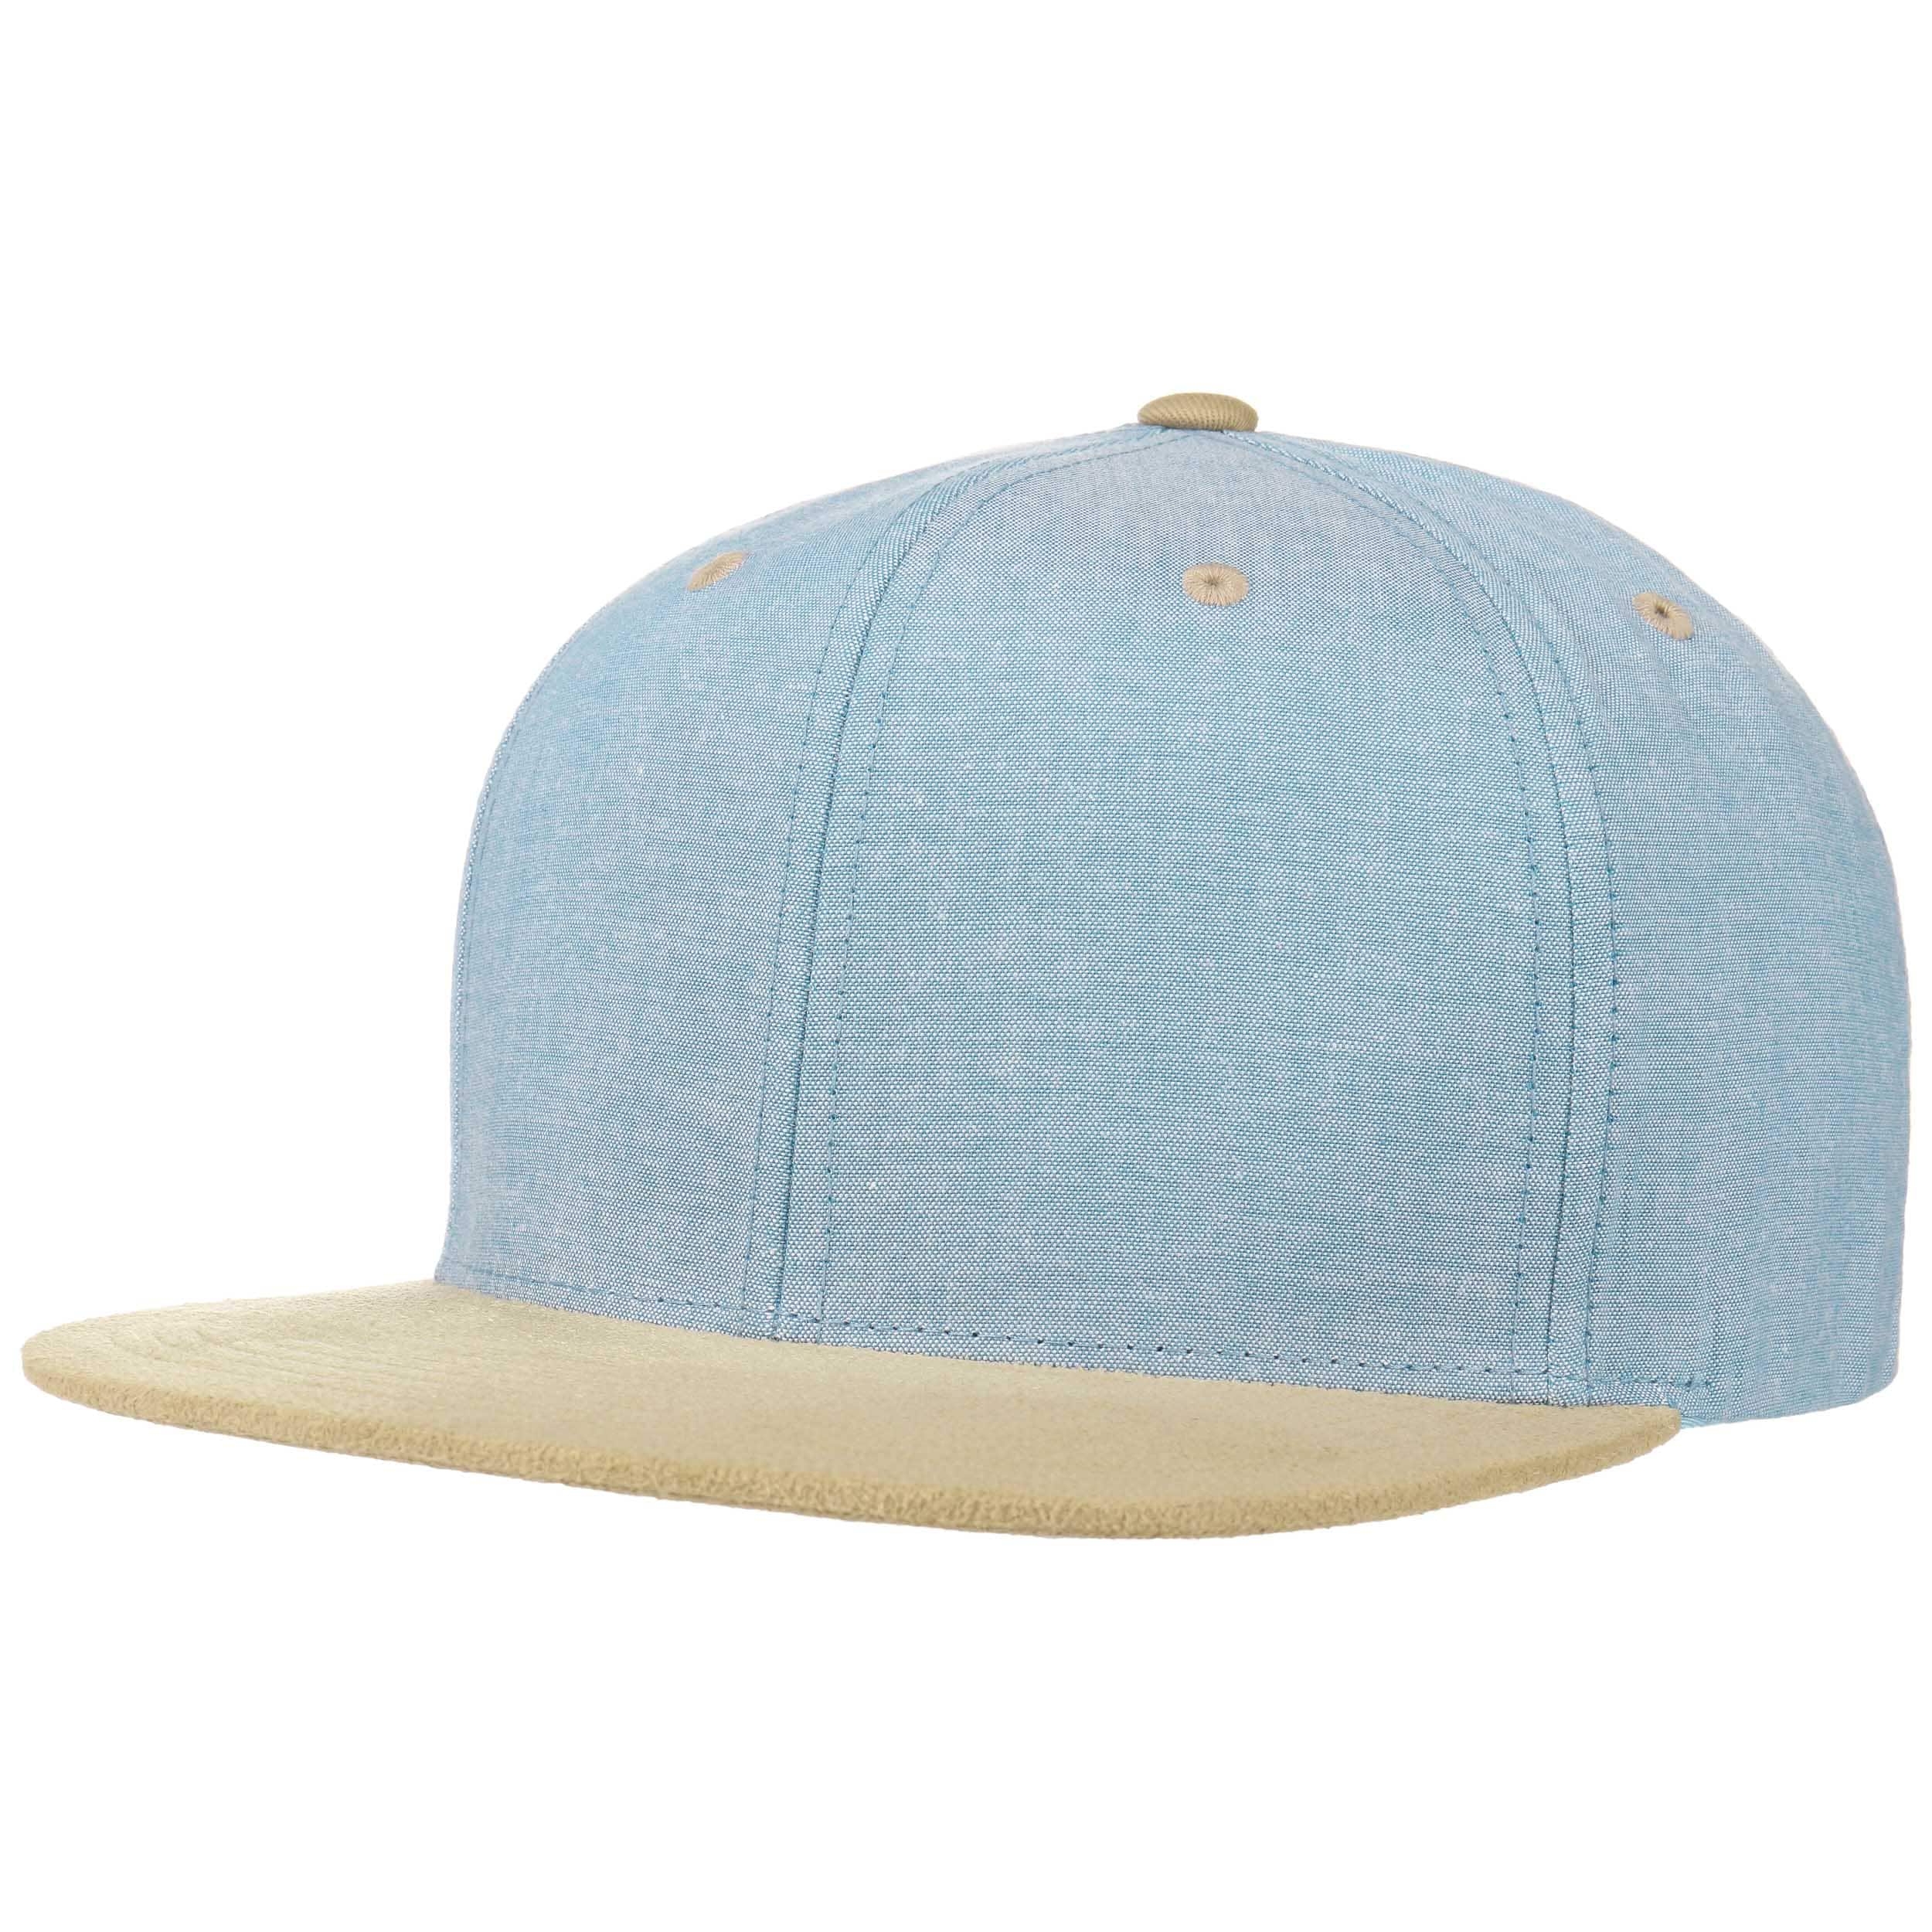 black and light blue fitted hat